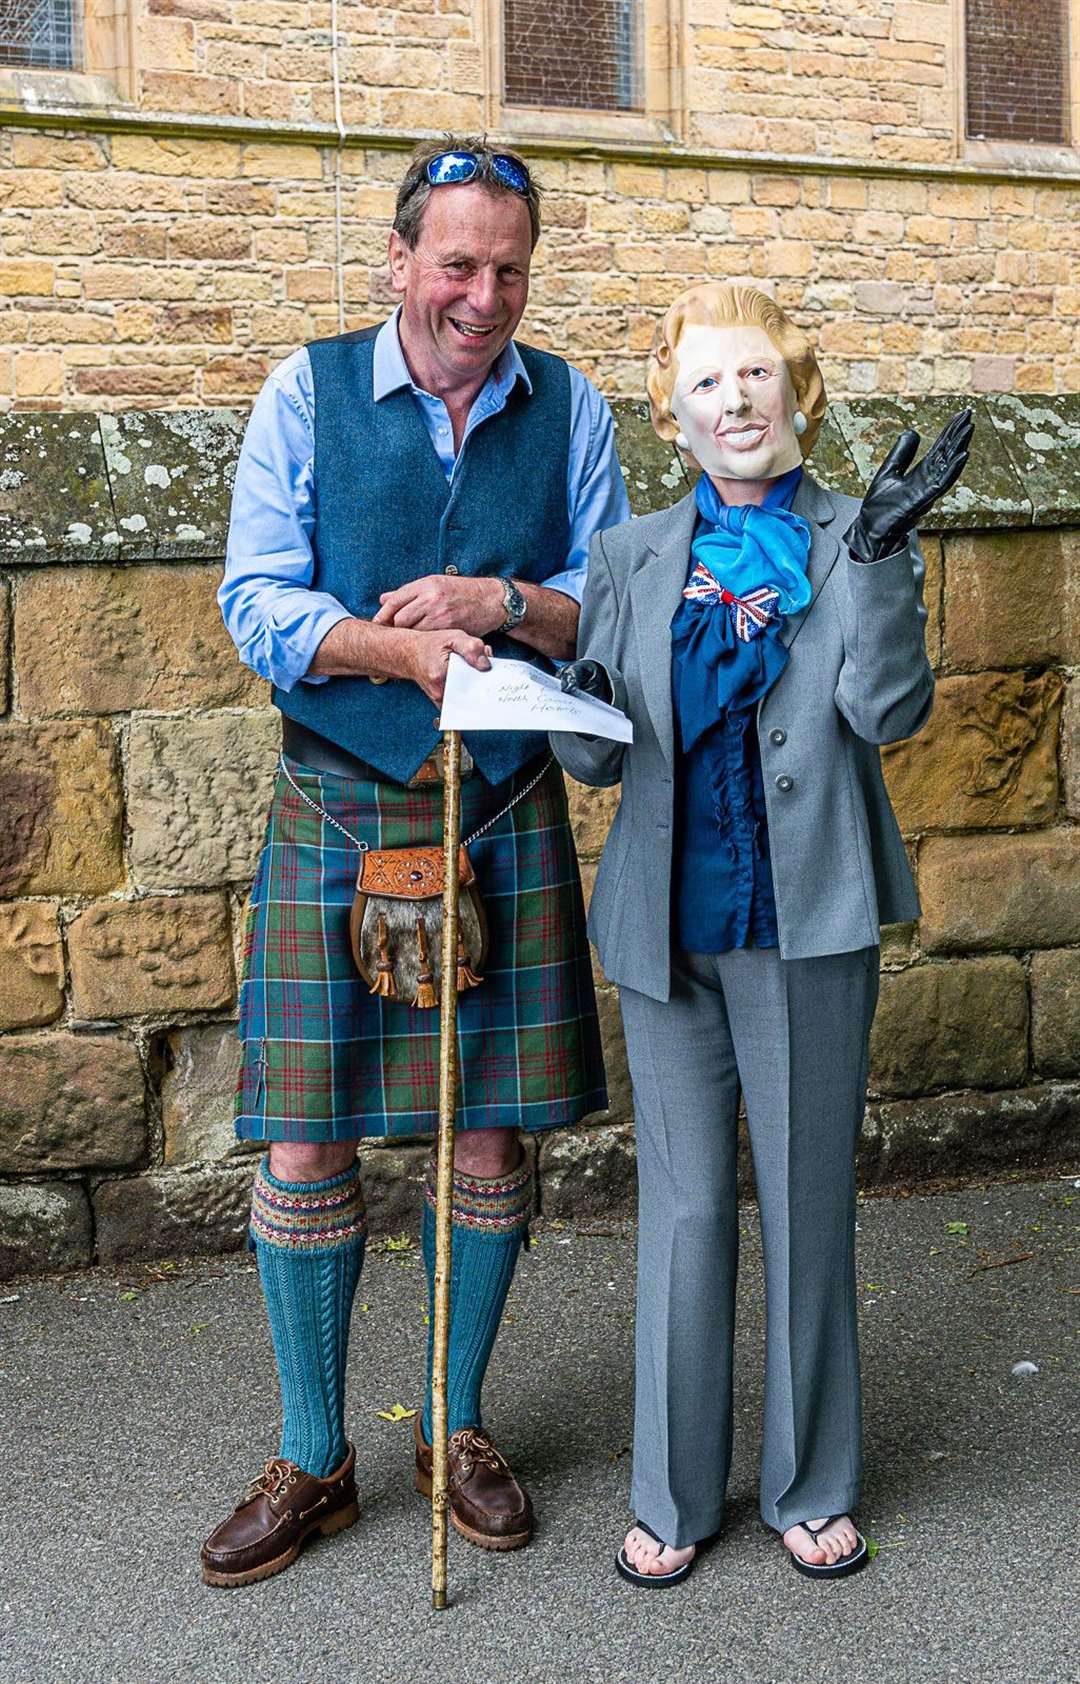 David Whiteford, chairman of Highland Coast Hotels, congratulates Sheonach Haig on winning the adult fancy dress competition as "Guess Who?" Picture: Andy Kirby